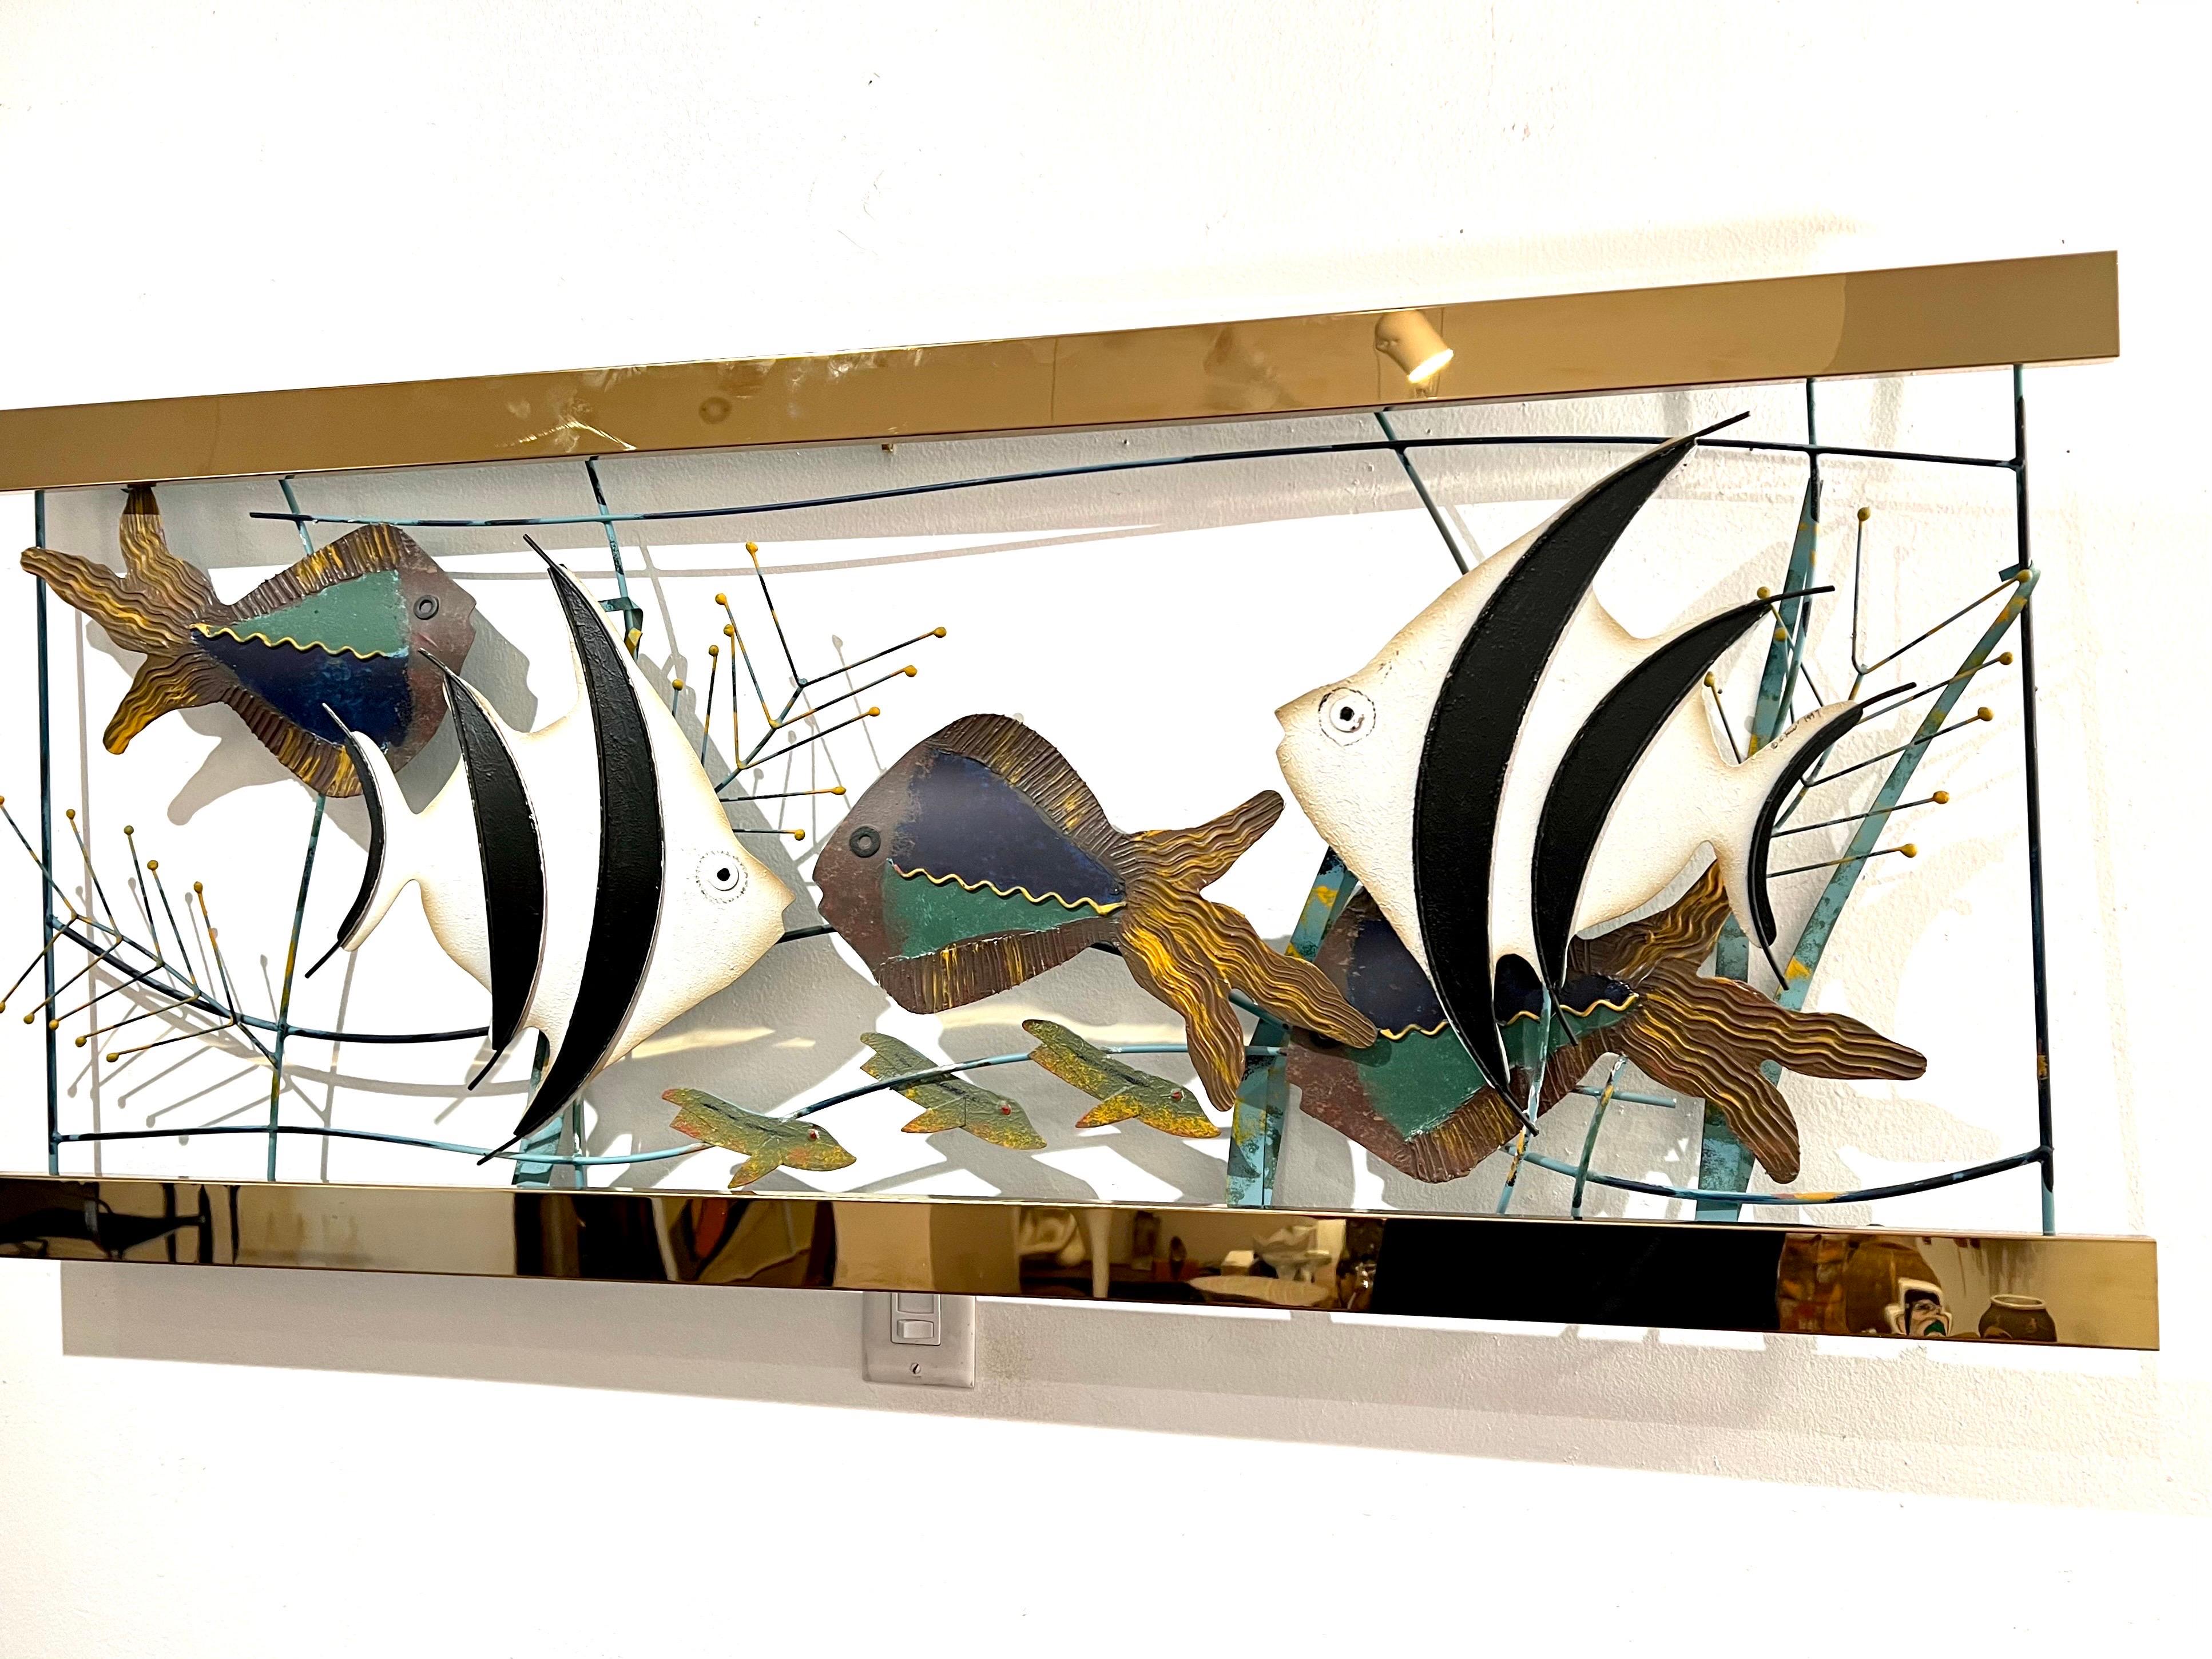 A very cool and rare striking large aquarium by Curtis Jere signed and dated 1997, great clean condition with polished brass accent bars.